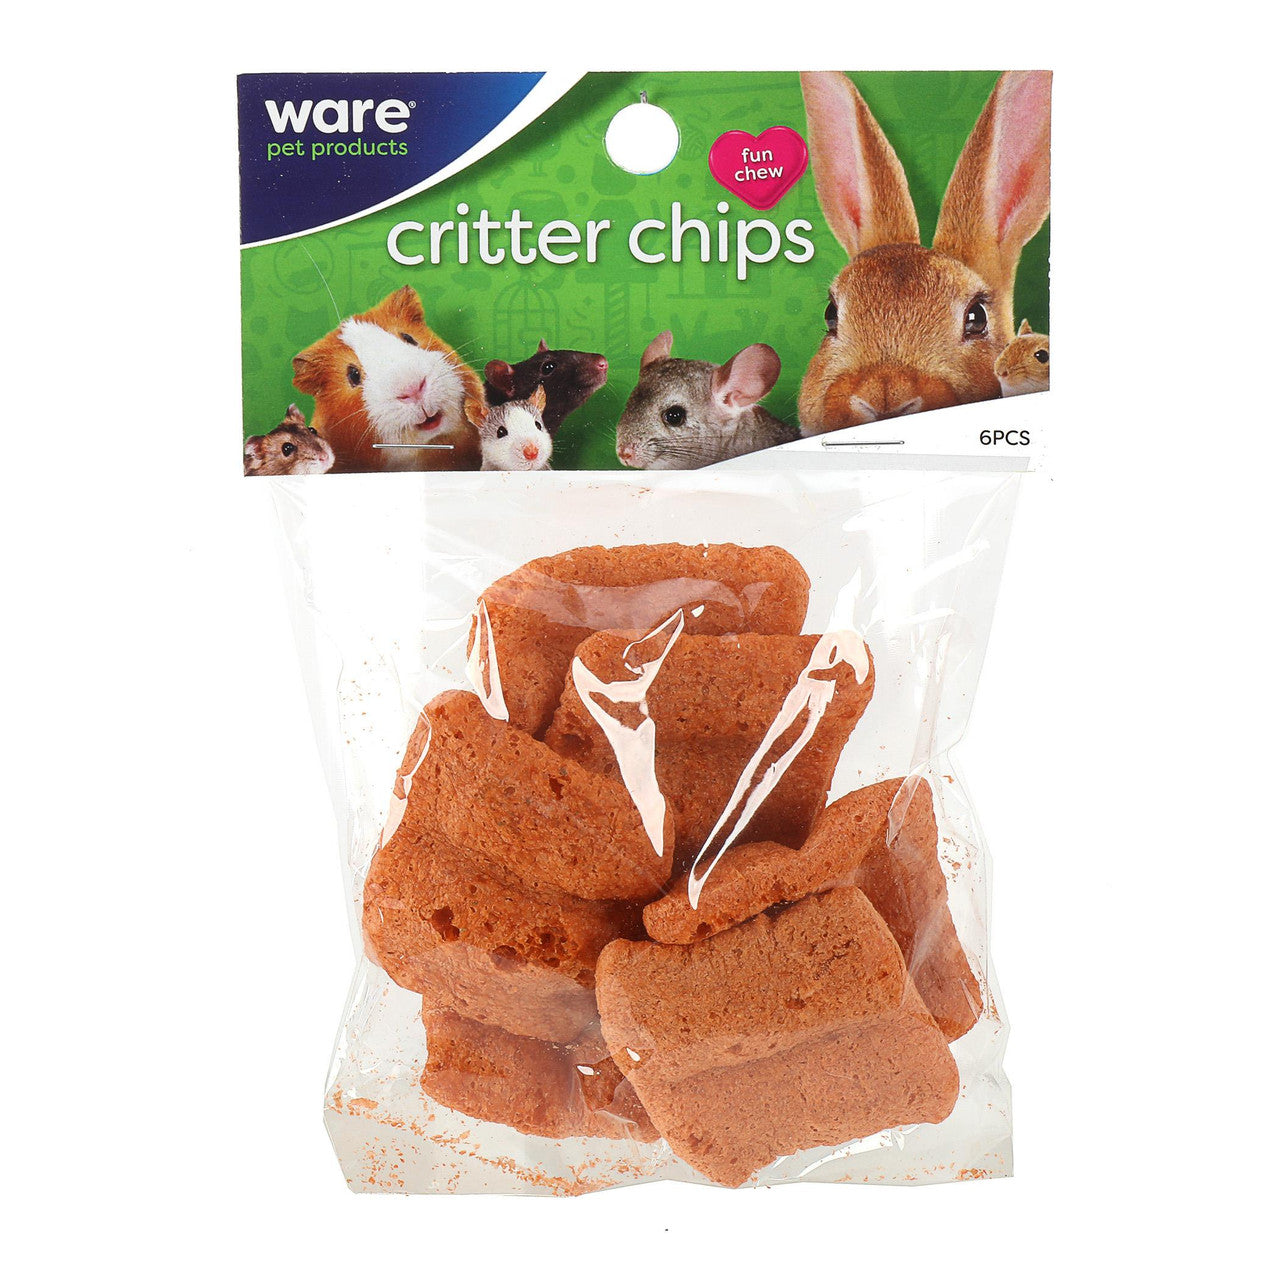 Ware Critter Chips Treat 791611102725